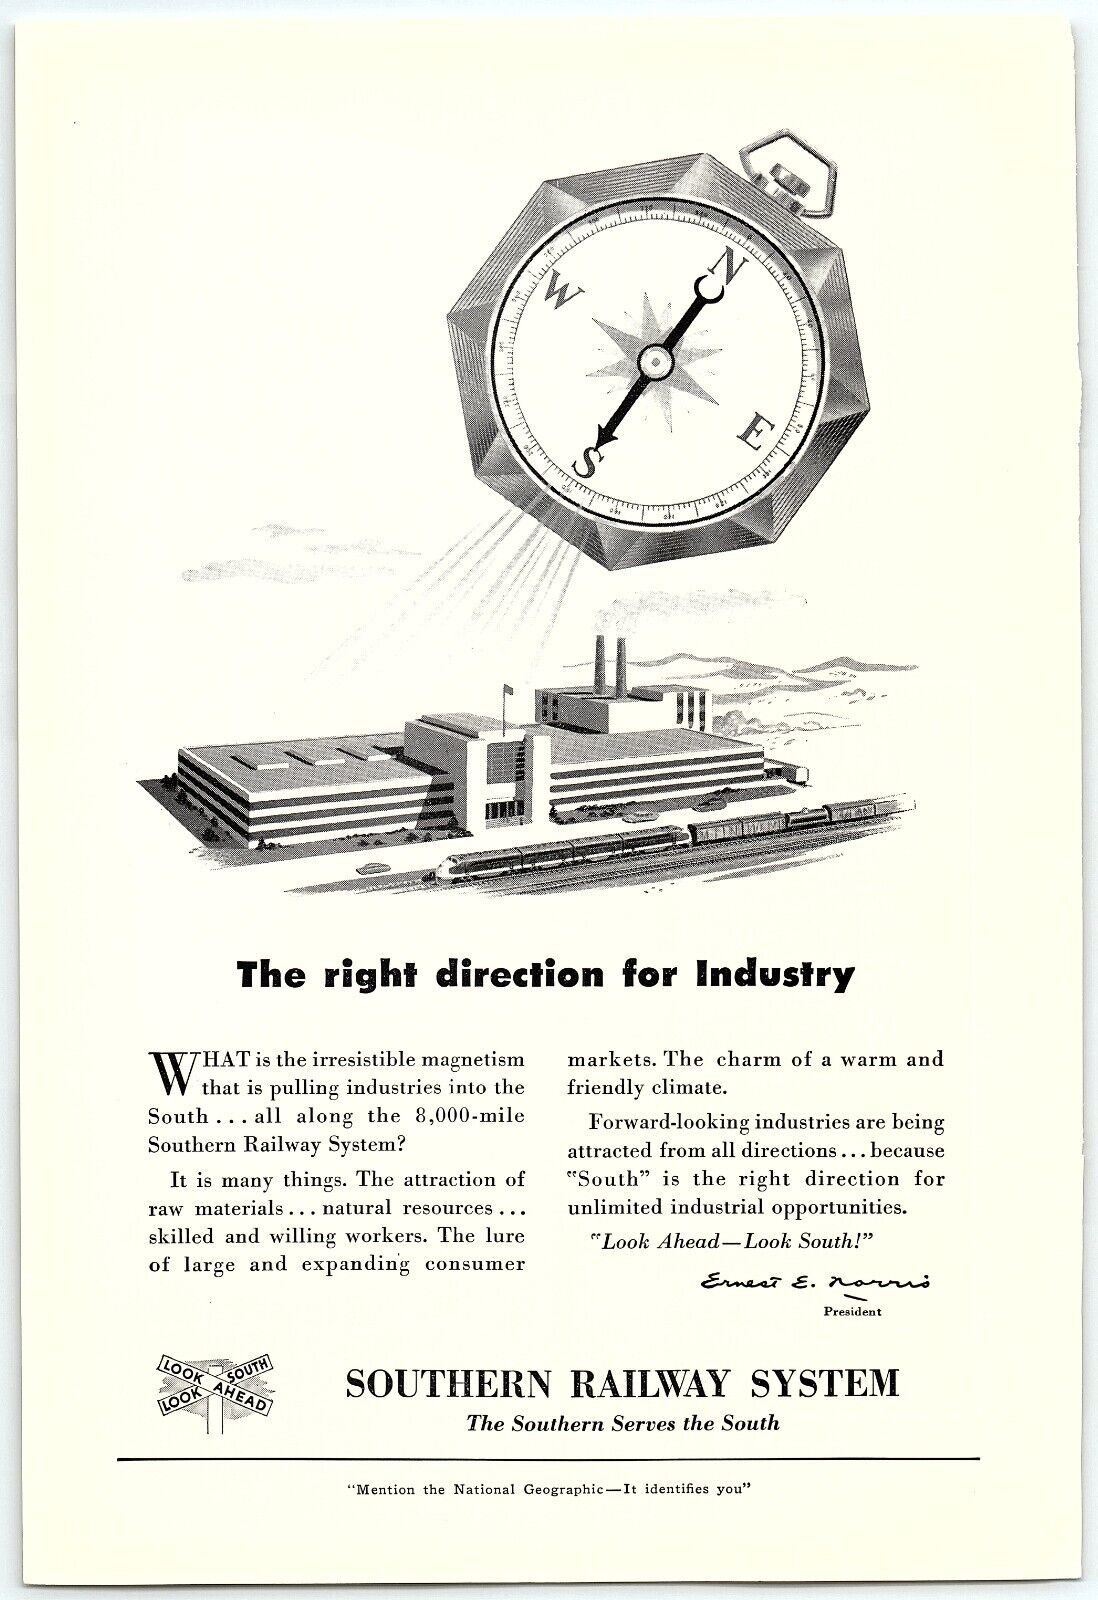 1950s SOUTHERN RAILWAY SYSTEM THE RIGHT DIRECTION FOR INDUSTRY PRINT AD Z6035